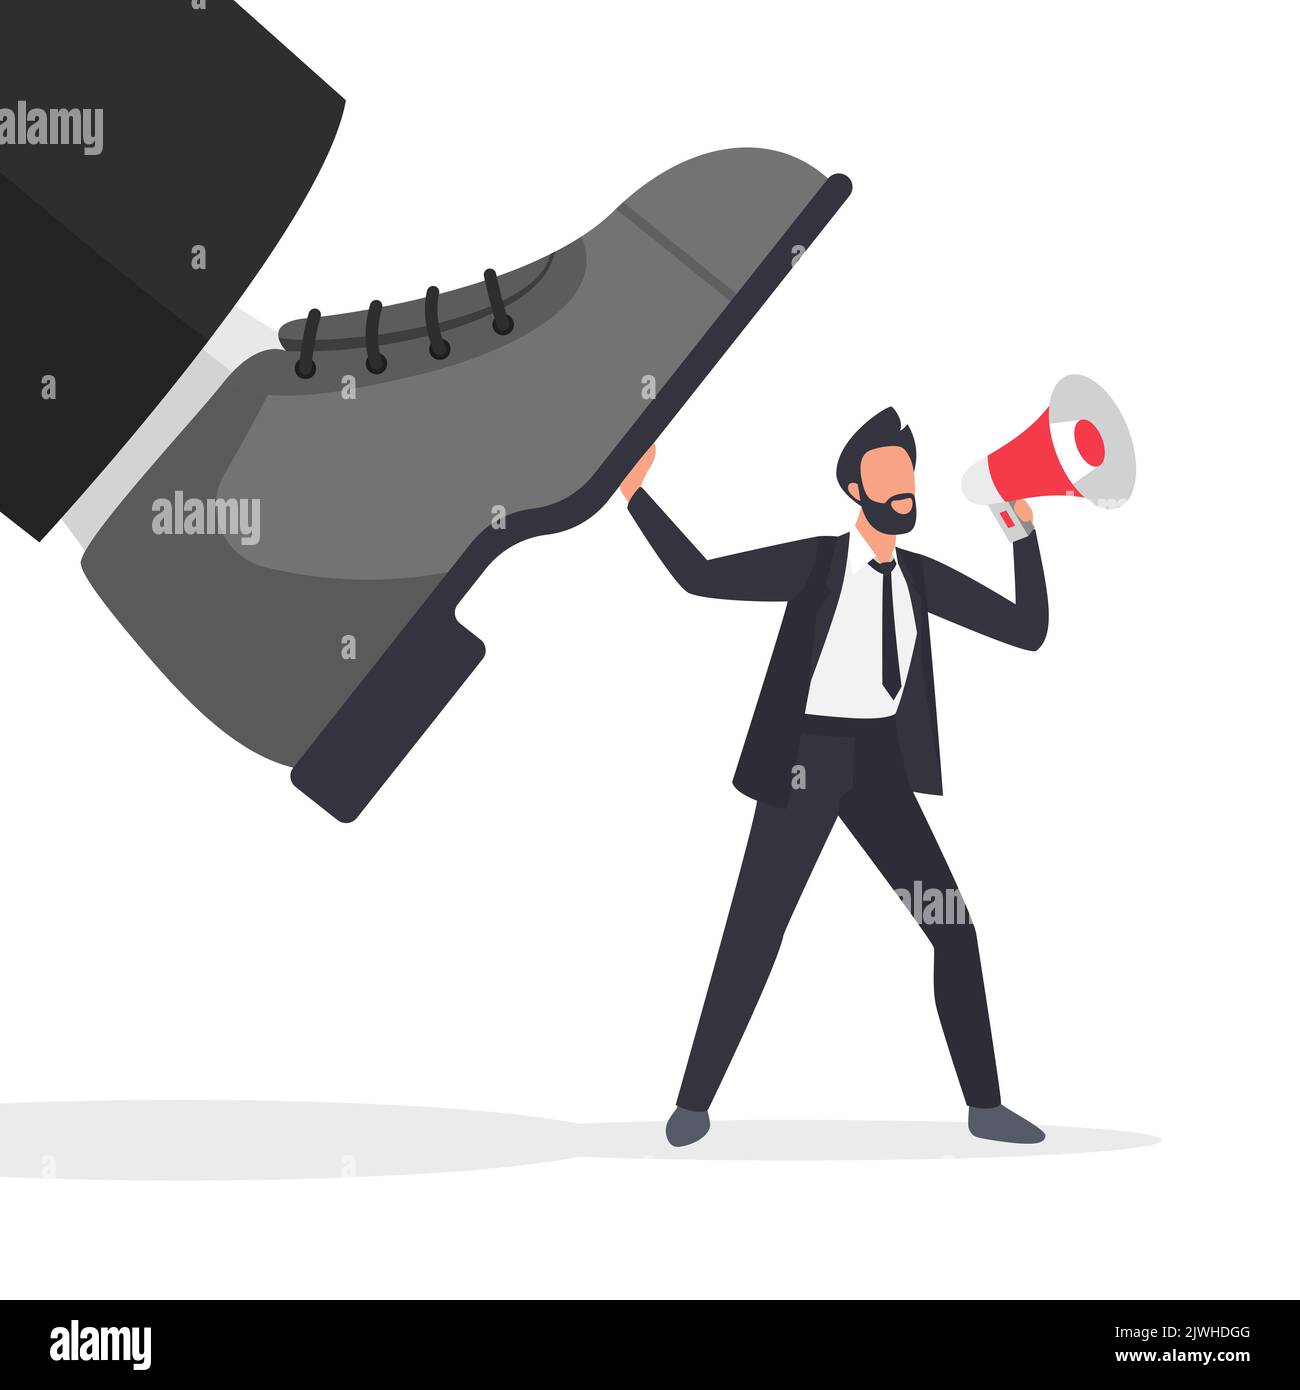 Pressure, violence and kick of giant foot to man employee with megaphone vector illustration. Cartoon manager shouting into loudspeaker about tyranny, leadership problem. Freedom, protest concept Stock Vector